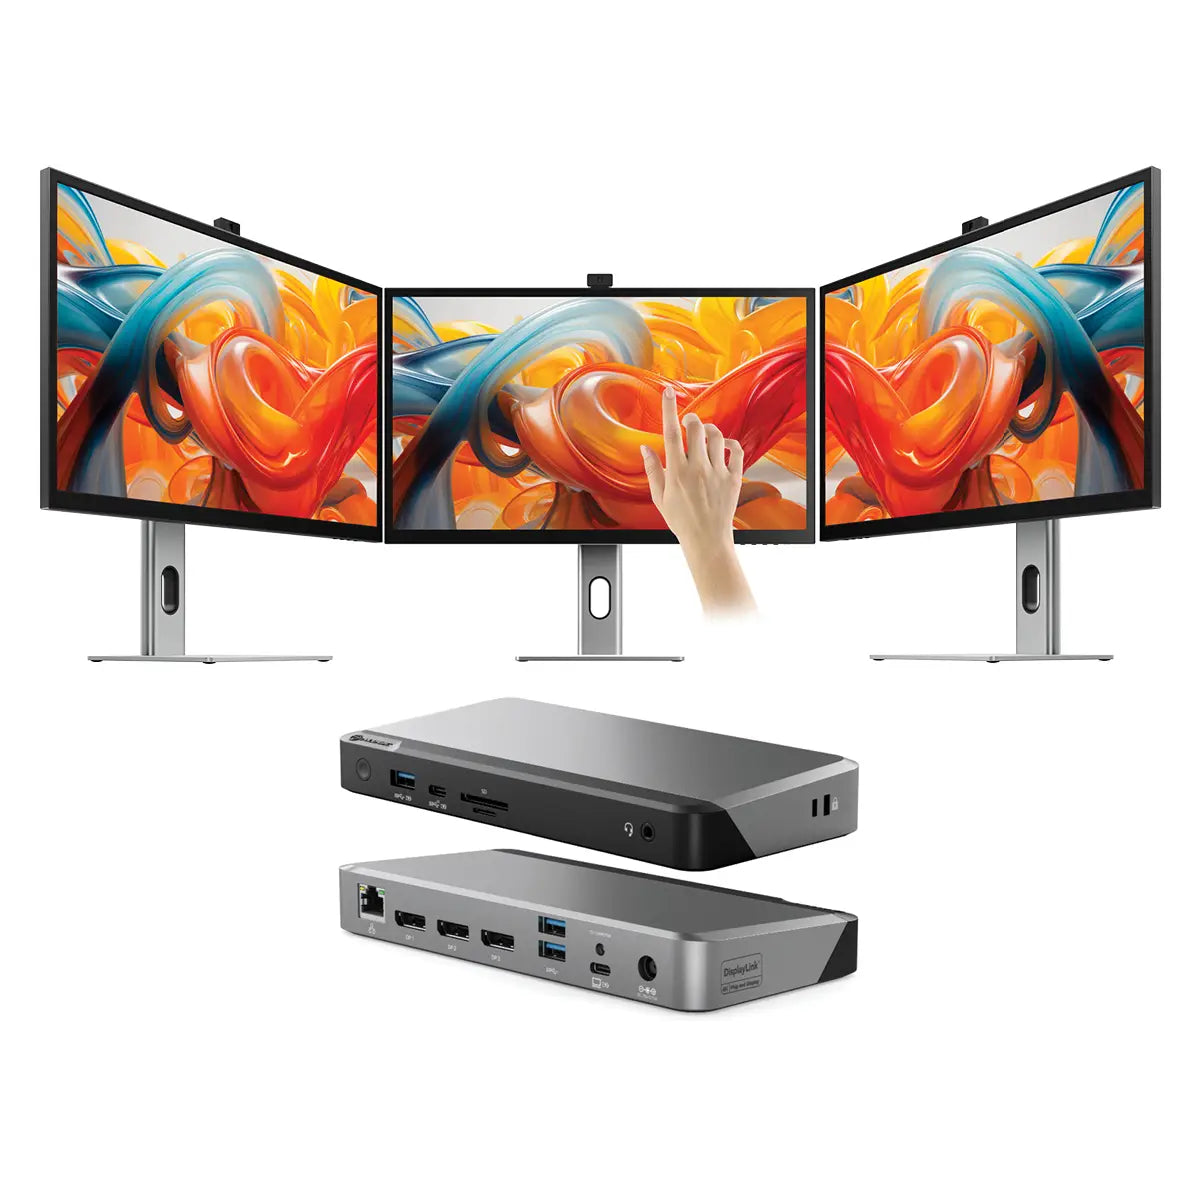 clarity-pro-touch-27-uhd-4k-monitor-with-65w-pd-webcam-and-touchscreen-pack-of-2-dx3-triple-4k-display-universal-docking-station-with-100w-power-delivery_1